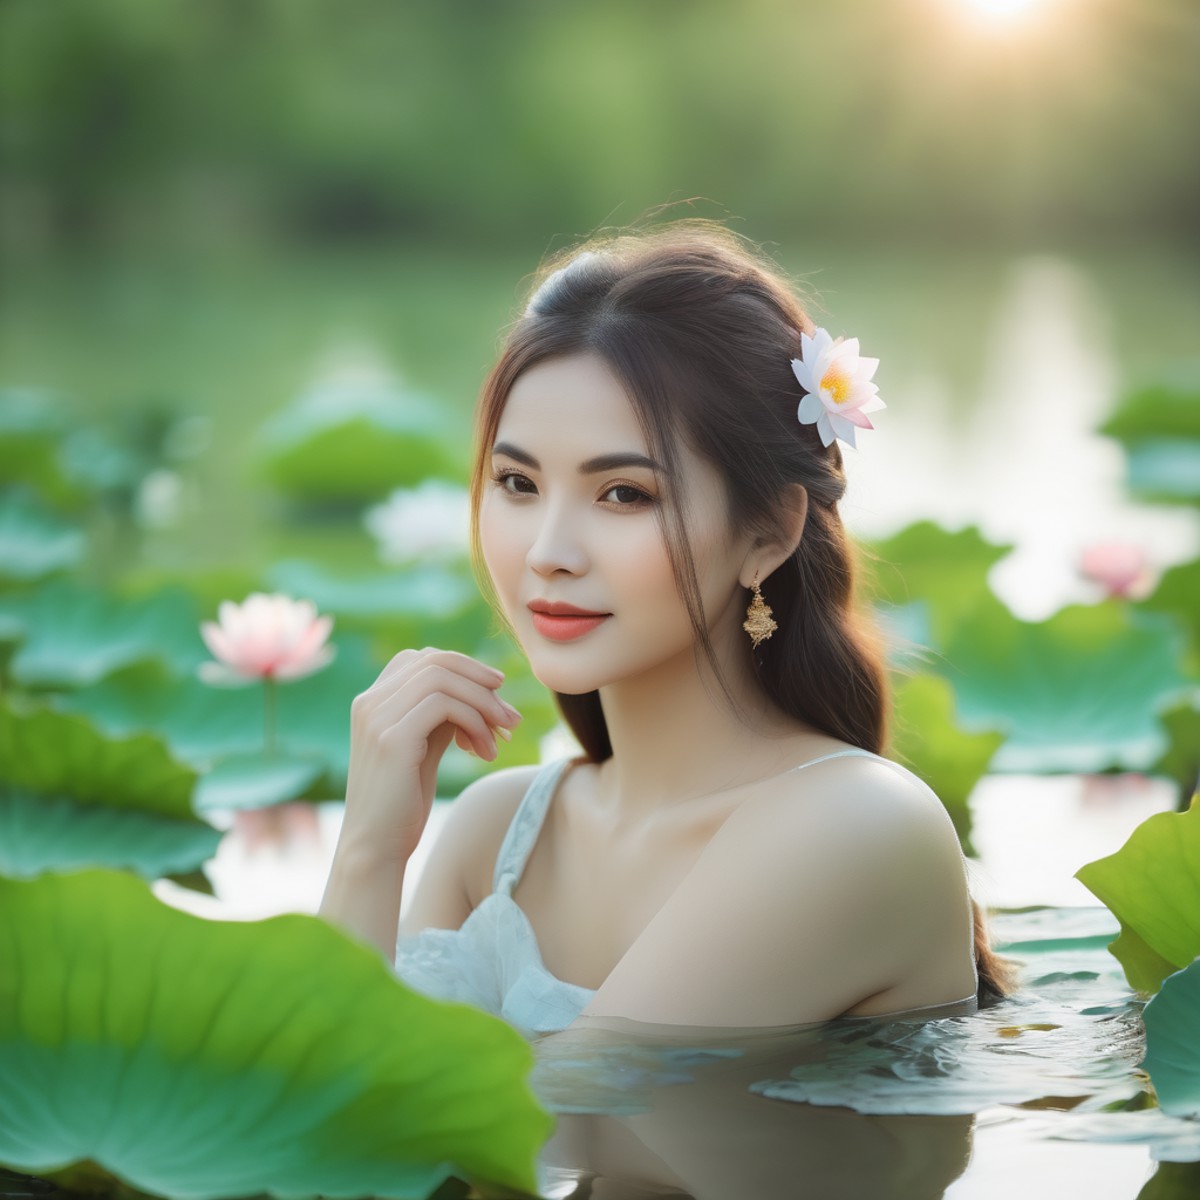 The woman's beauty can be enhanced by the reflection of the lotus flowers in the water. The vibrant colors of the lotus fl...